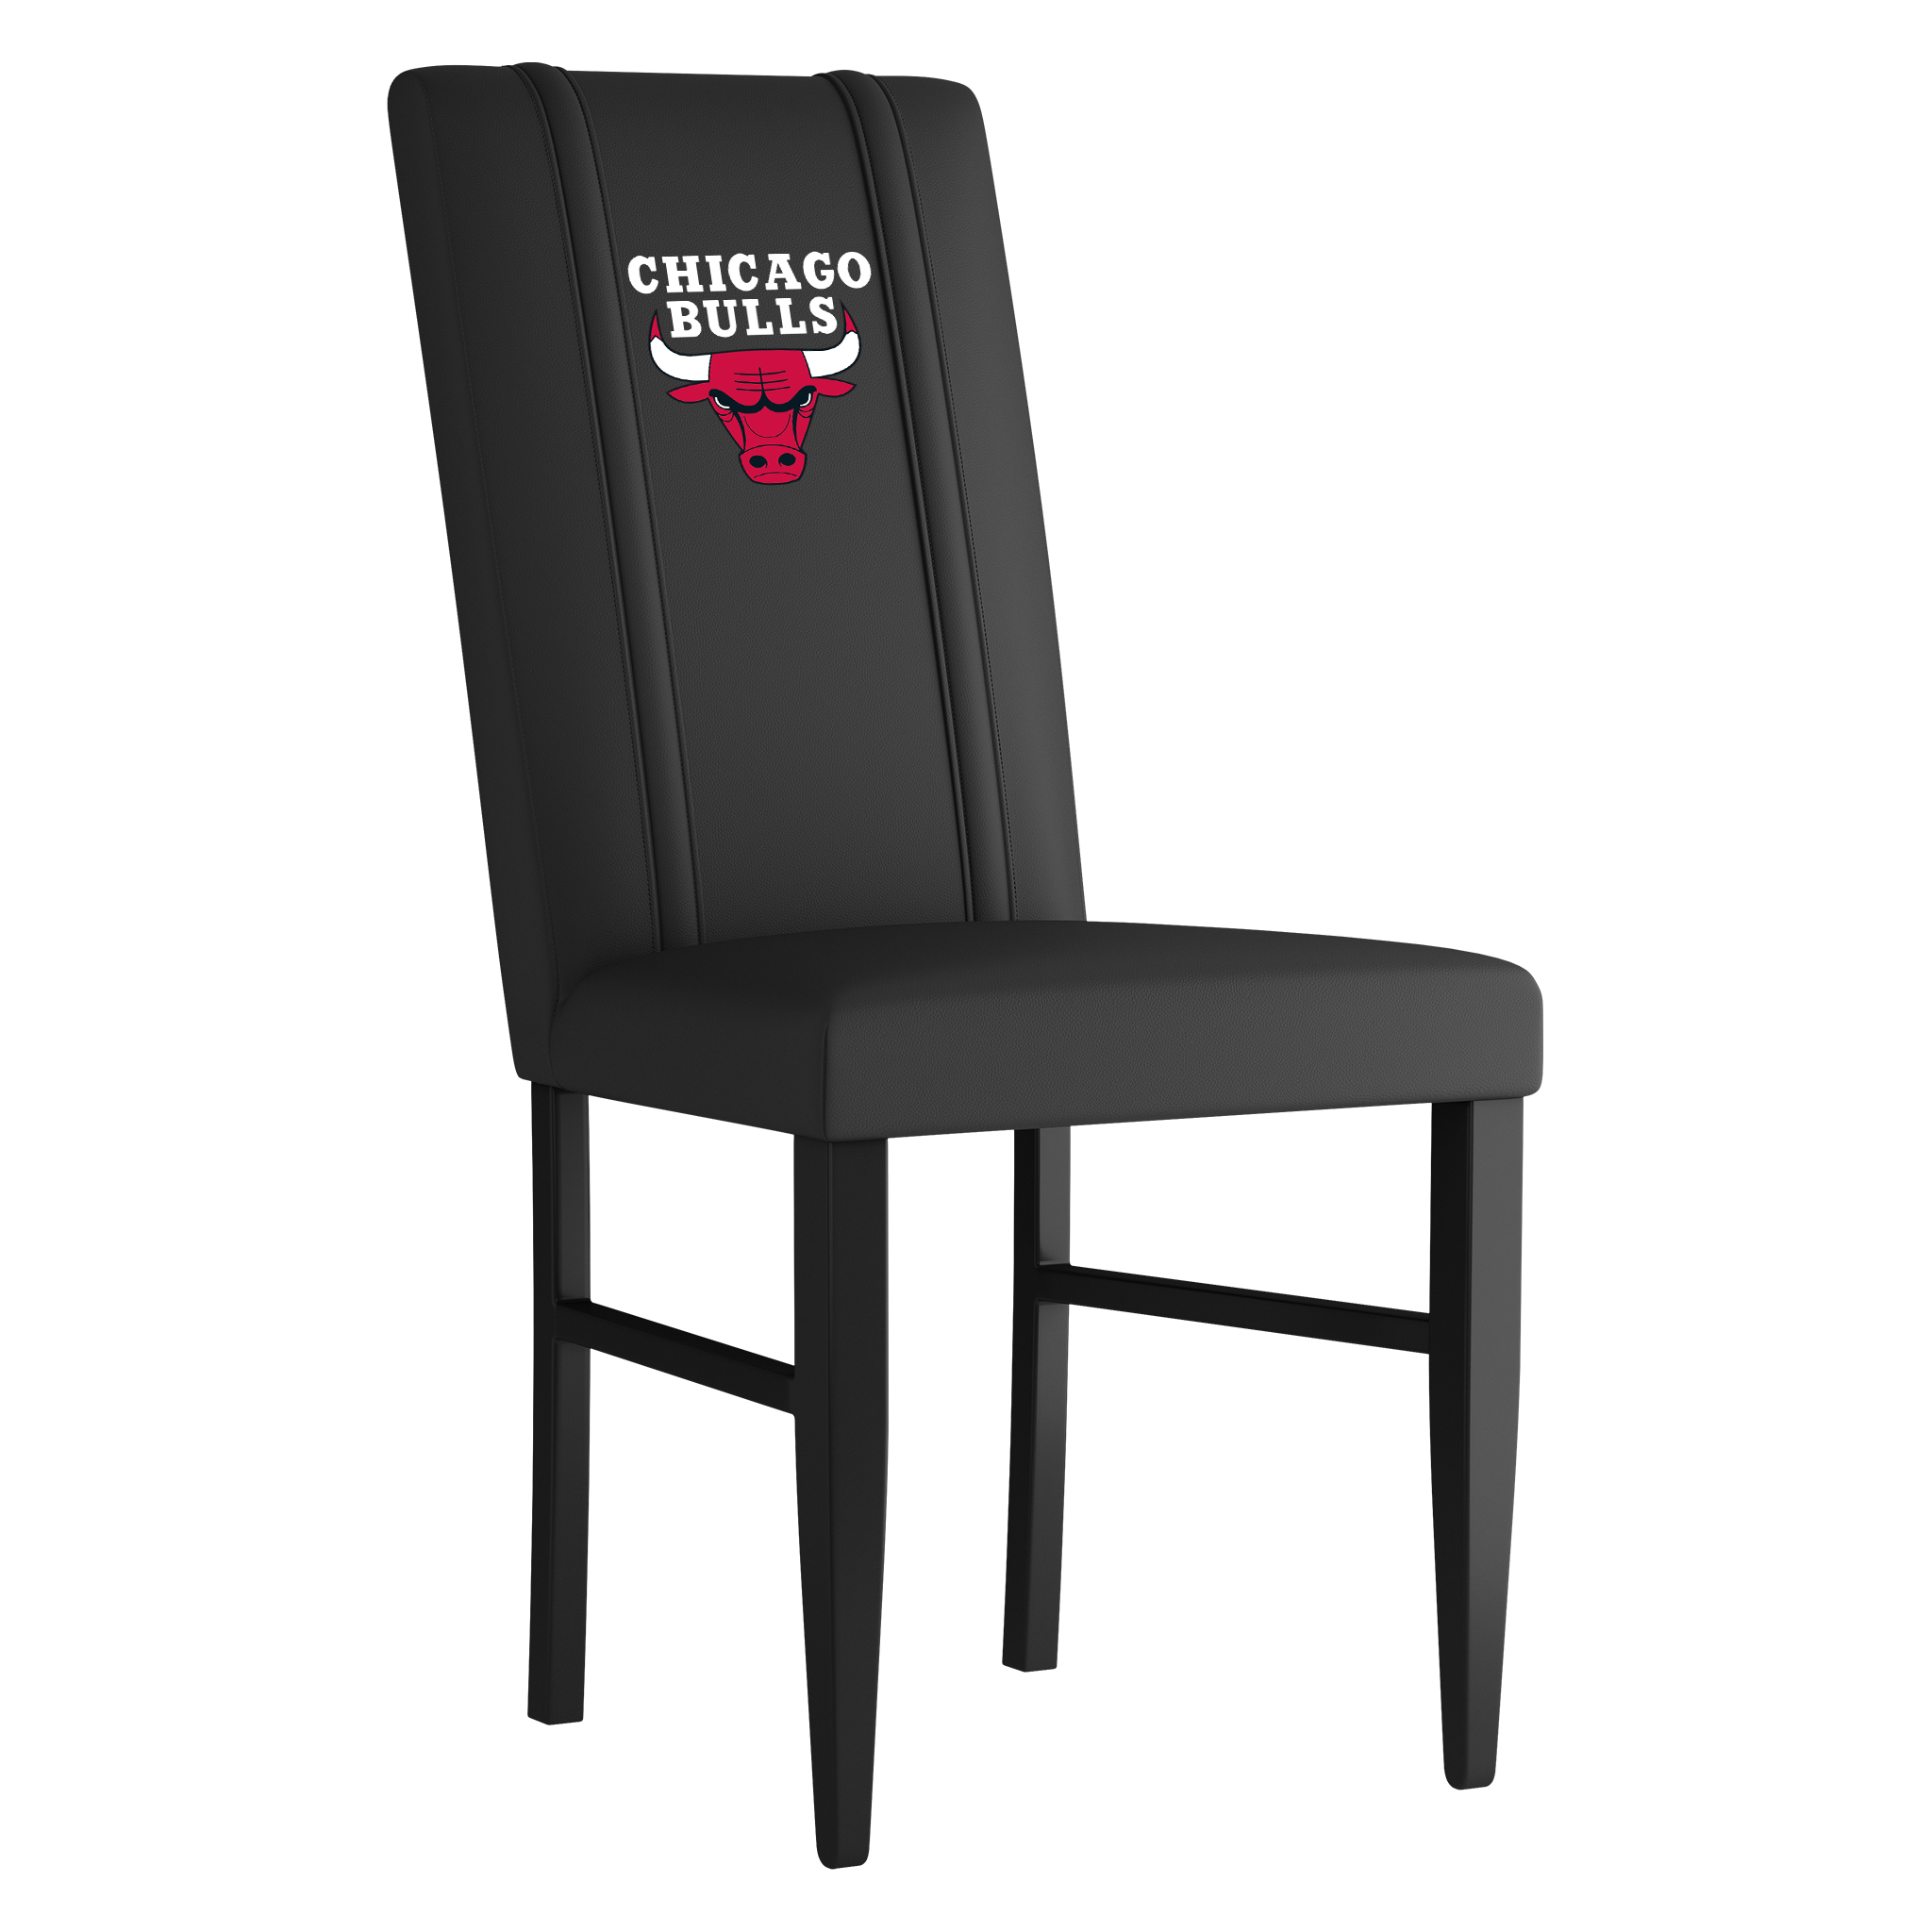 Chicago Bulls Side Chair 2000 With Chicago Bulls Logo